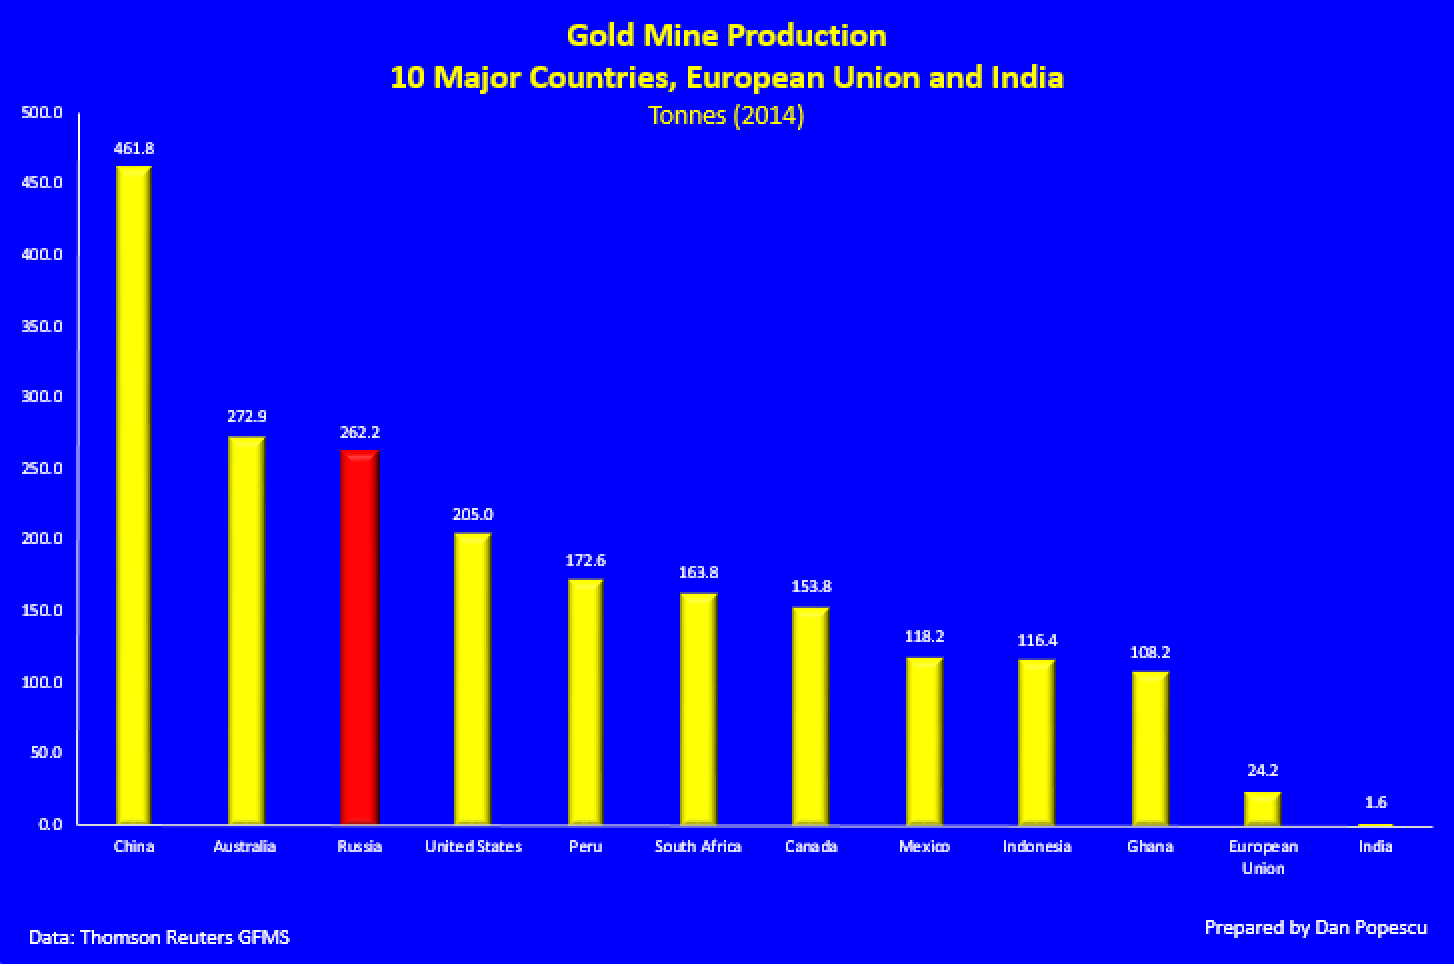 Gold Mine production 10 major countries